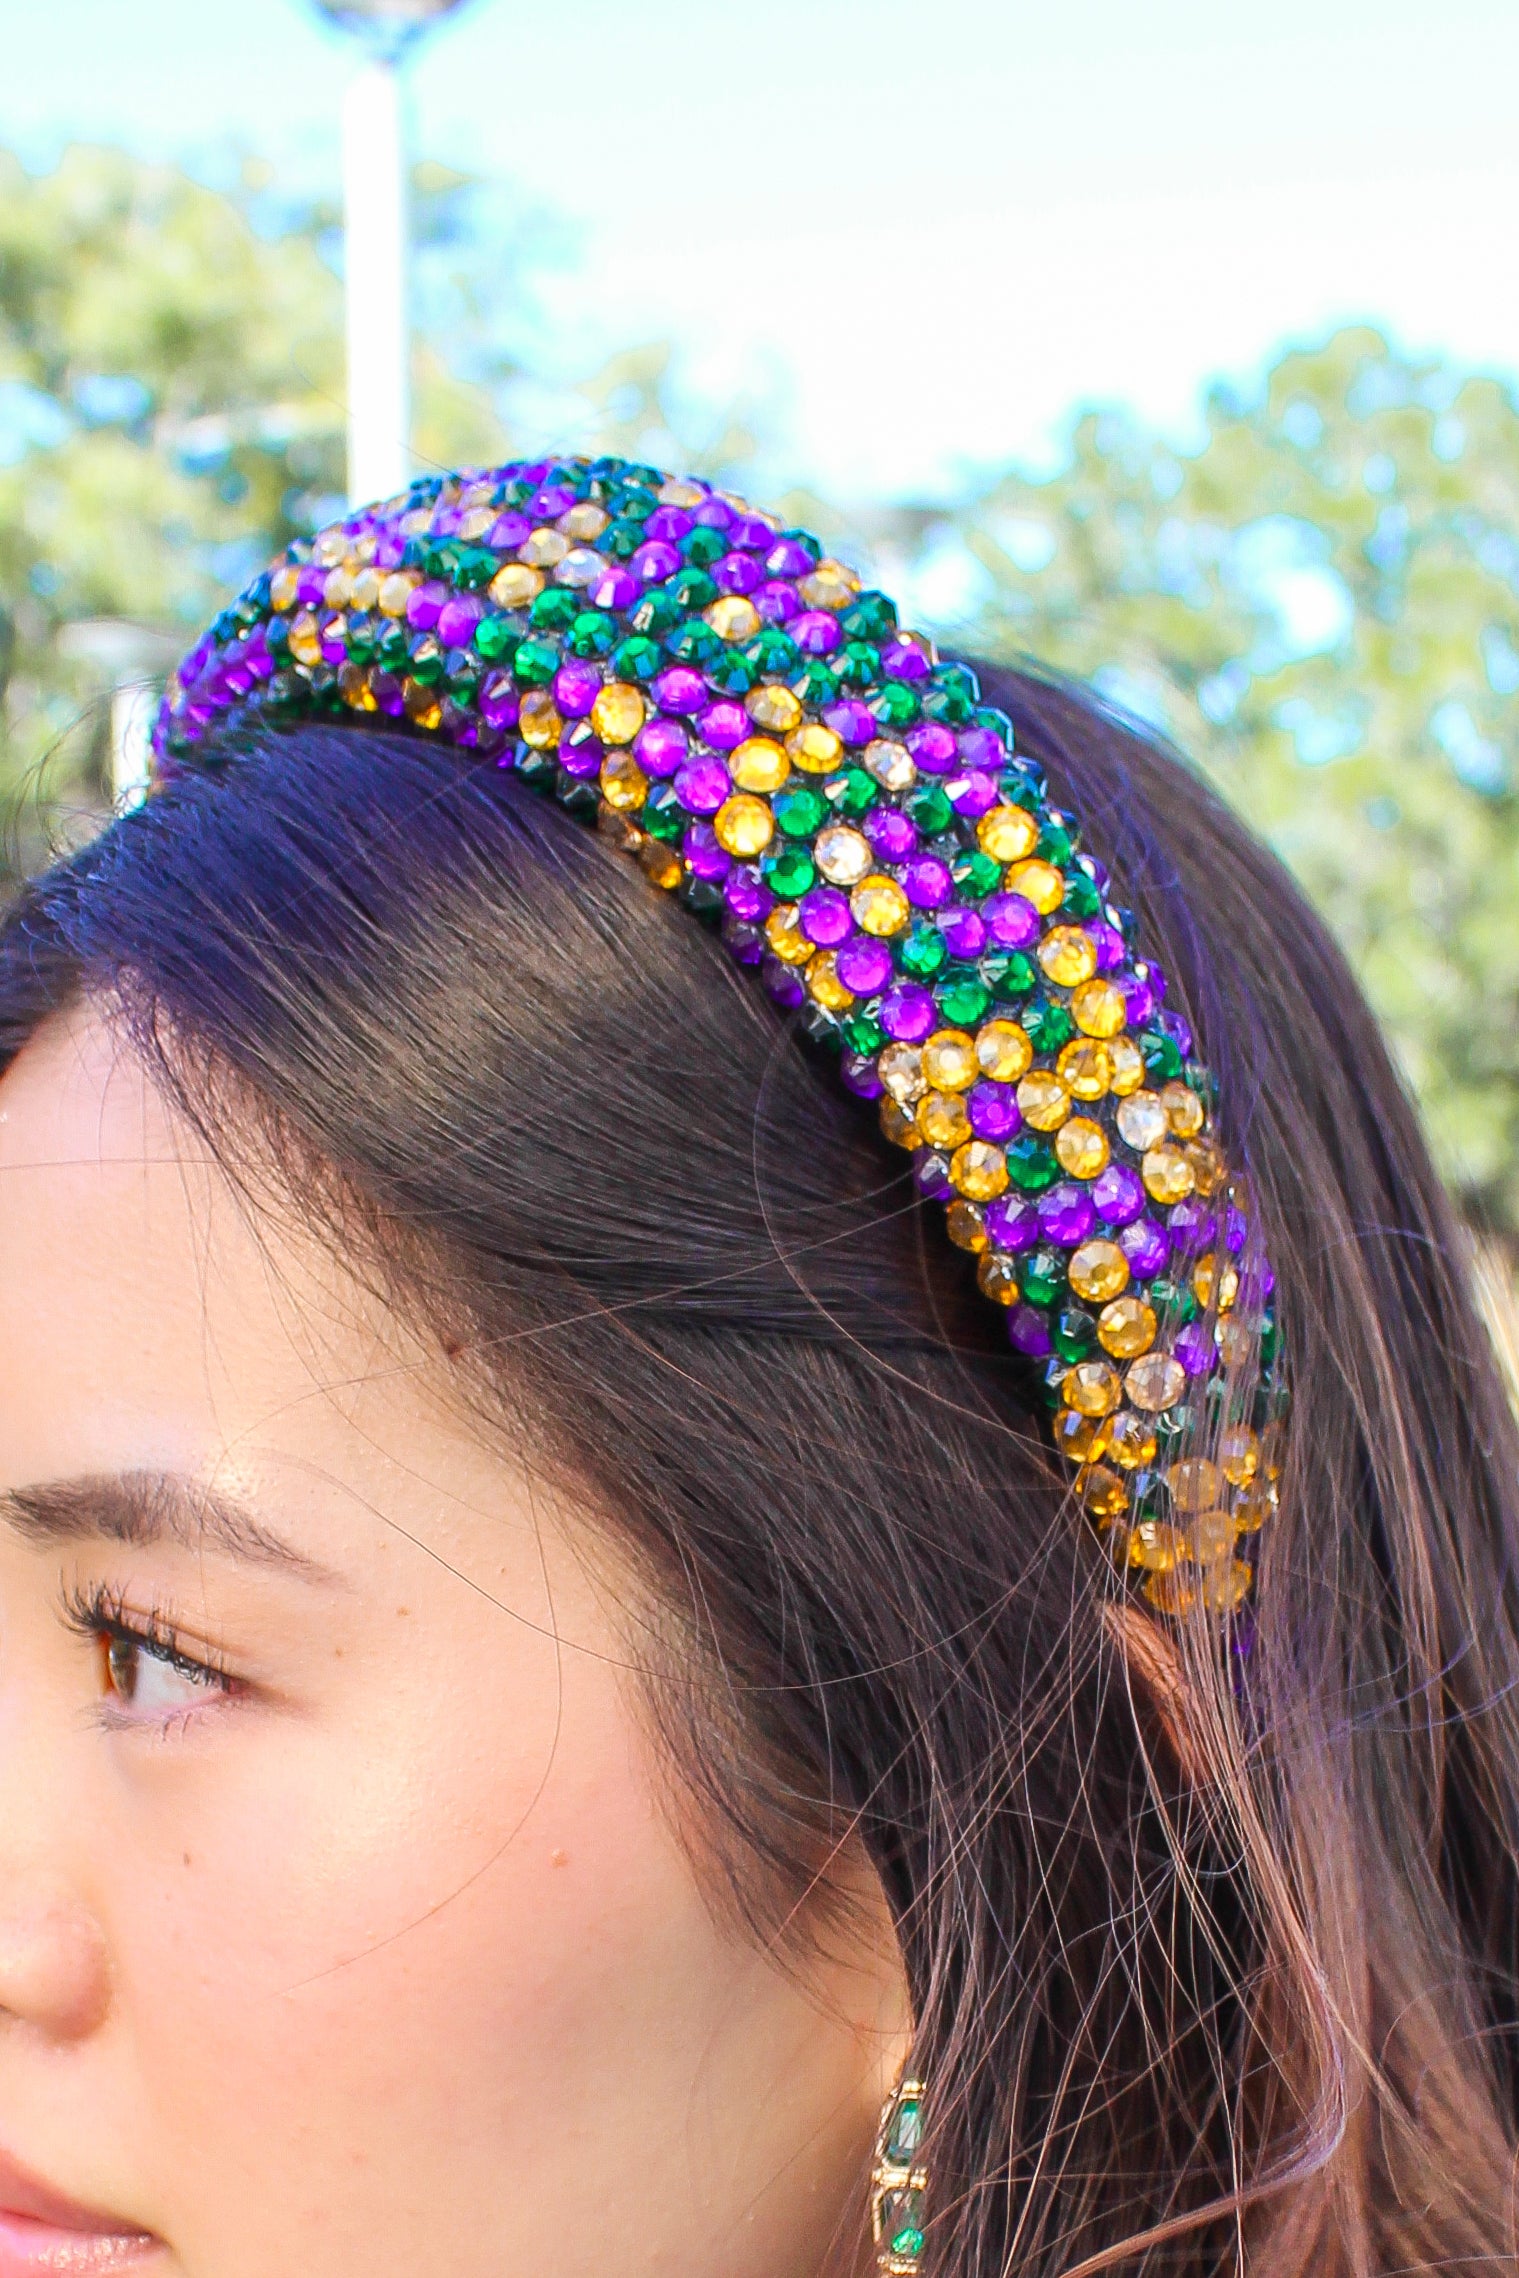 Frock Candy Beauty and The Beads Jeweled Headband